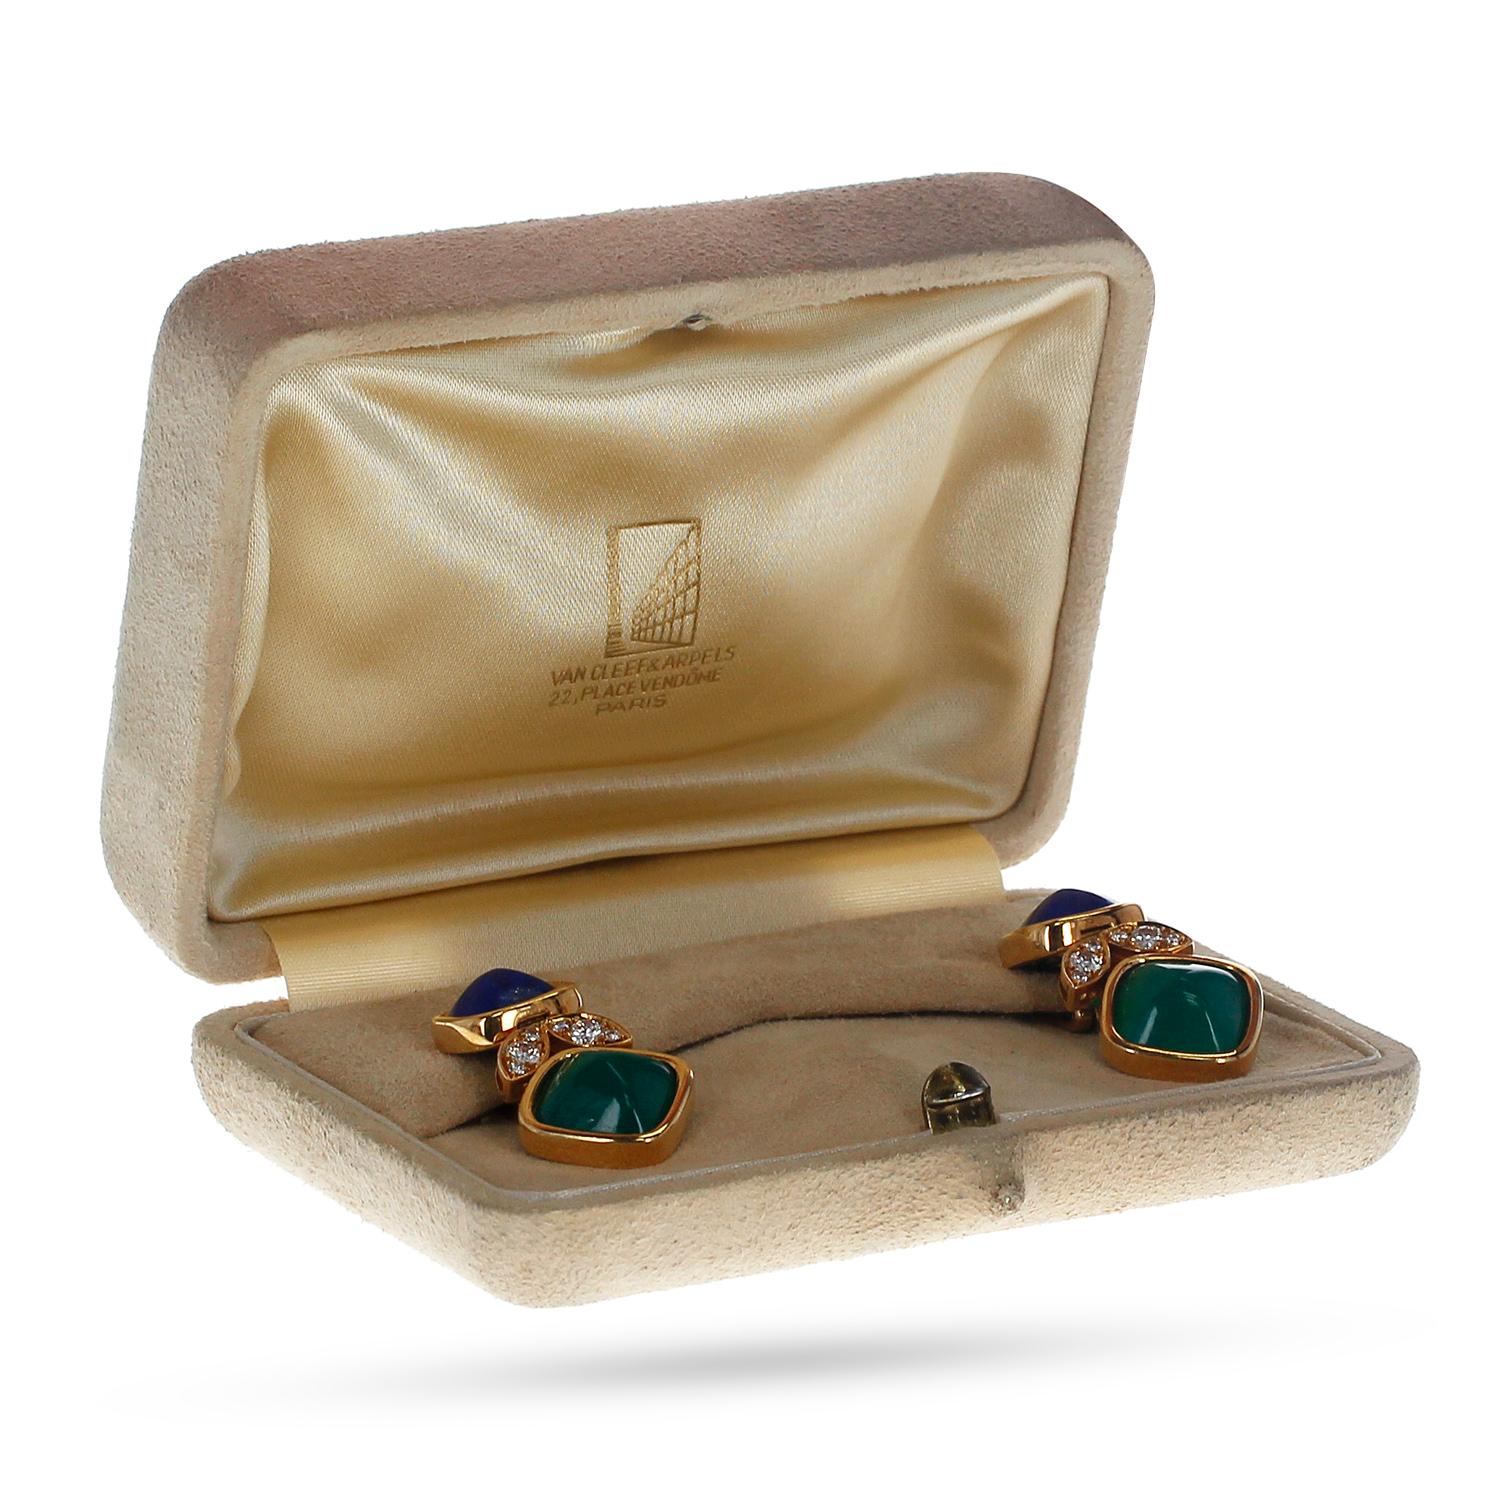 Sugarloaf Cabochon Van Cleef & Arpels Lapis Lazuli and Chrysoprase Earrings, French